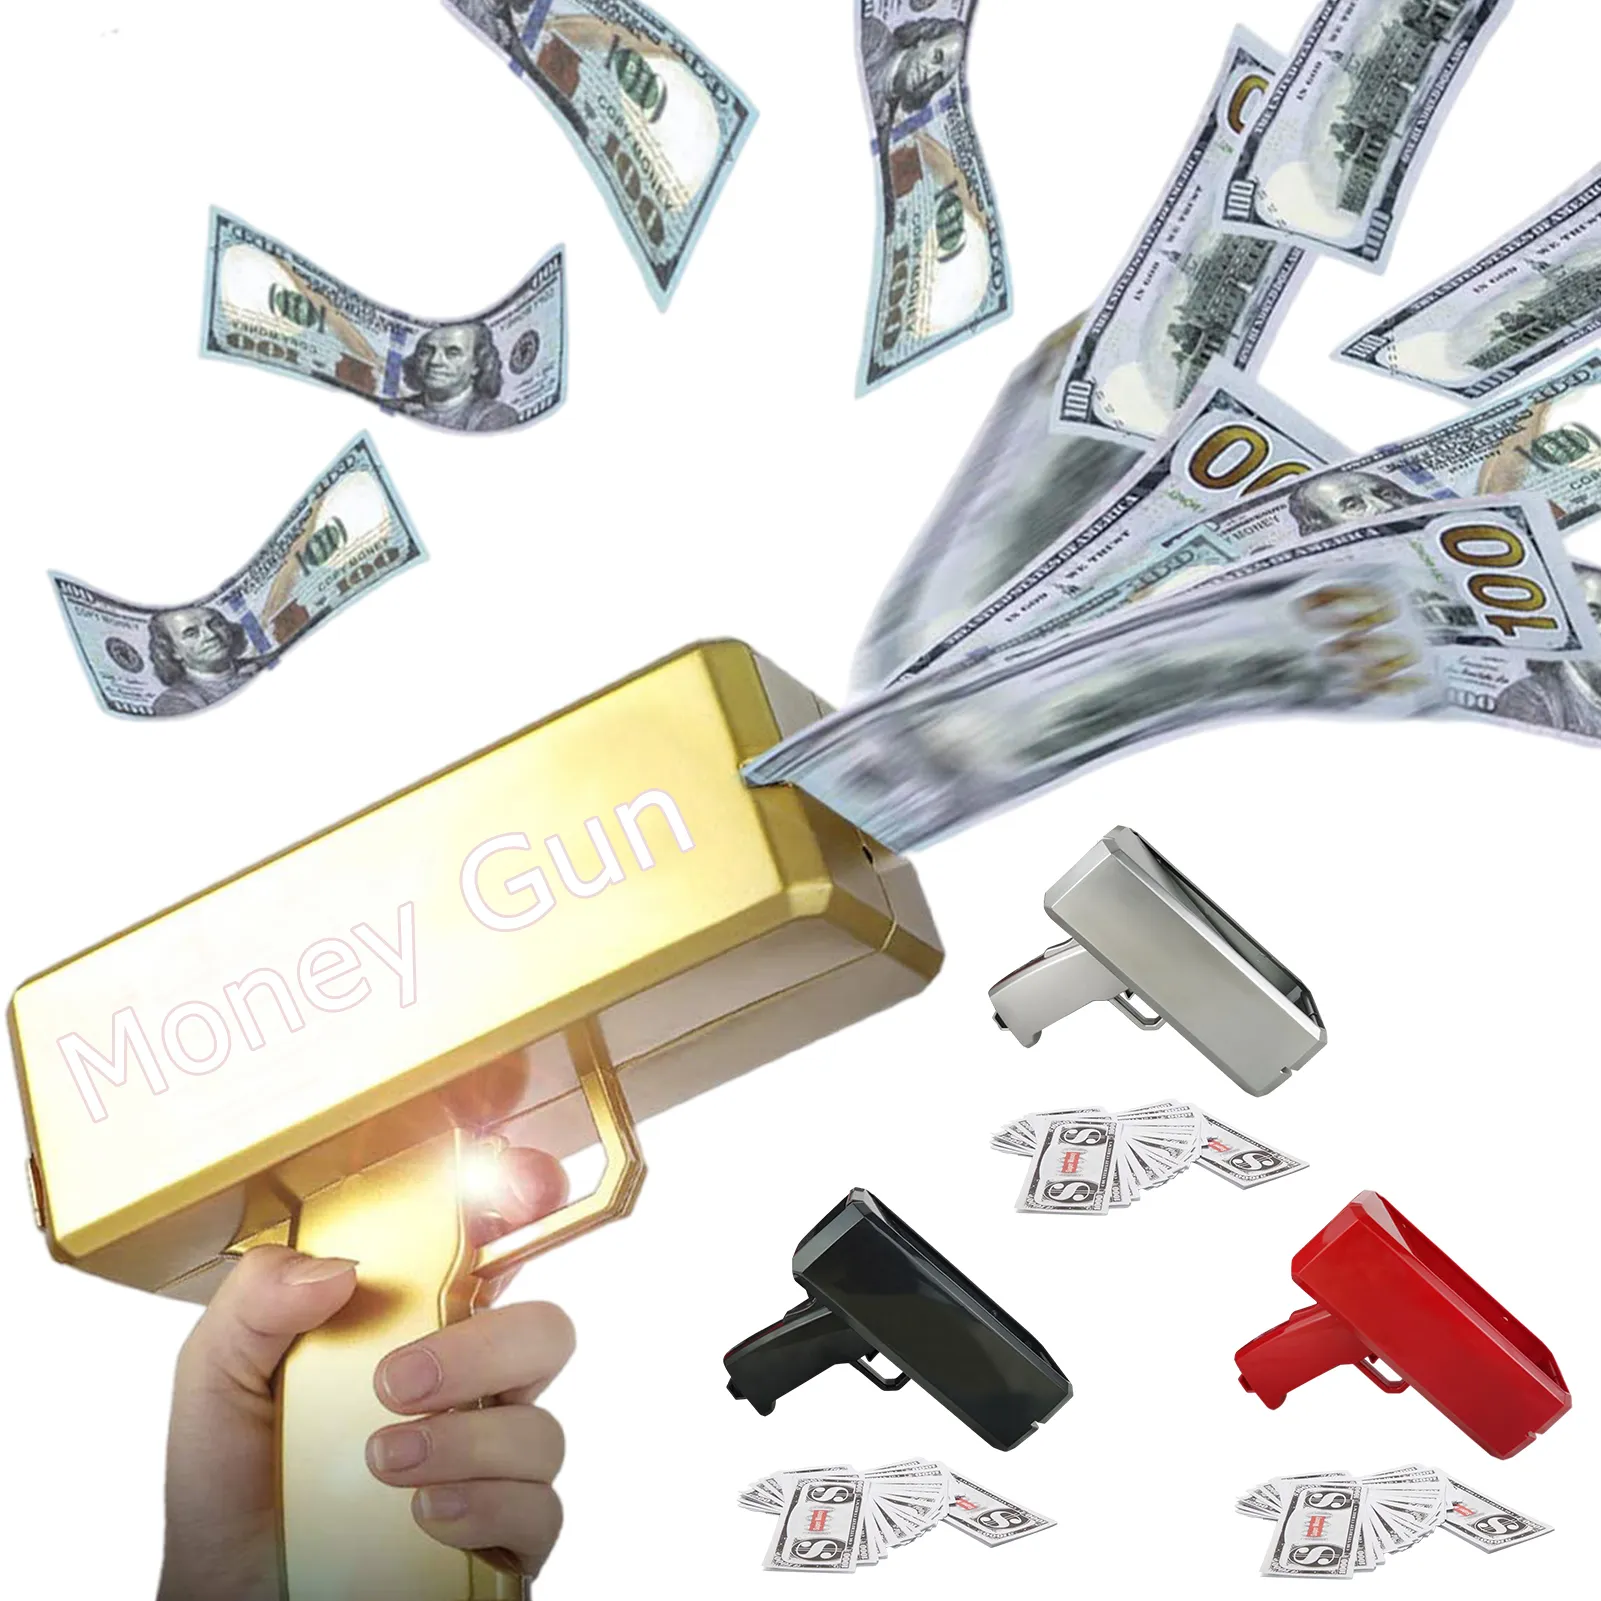 make it rain money gun toy pistol party fashion red name cash cannon outdoor family funny children party gifts gags amp practical jokes